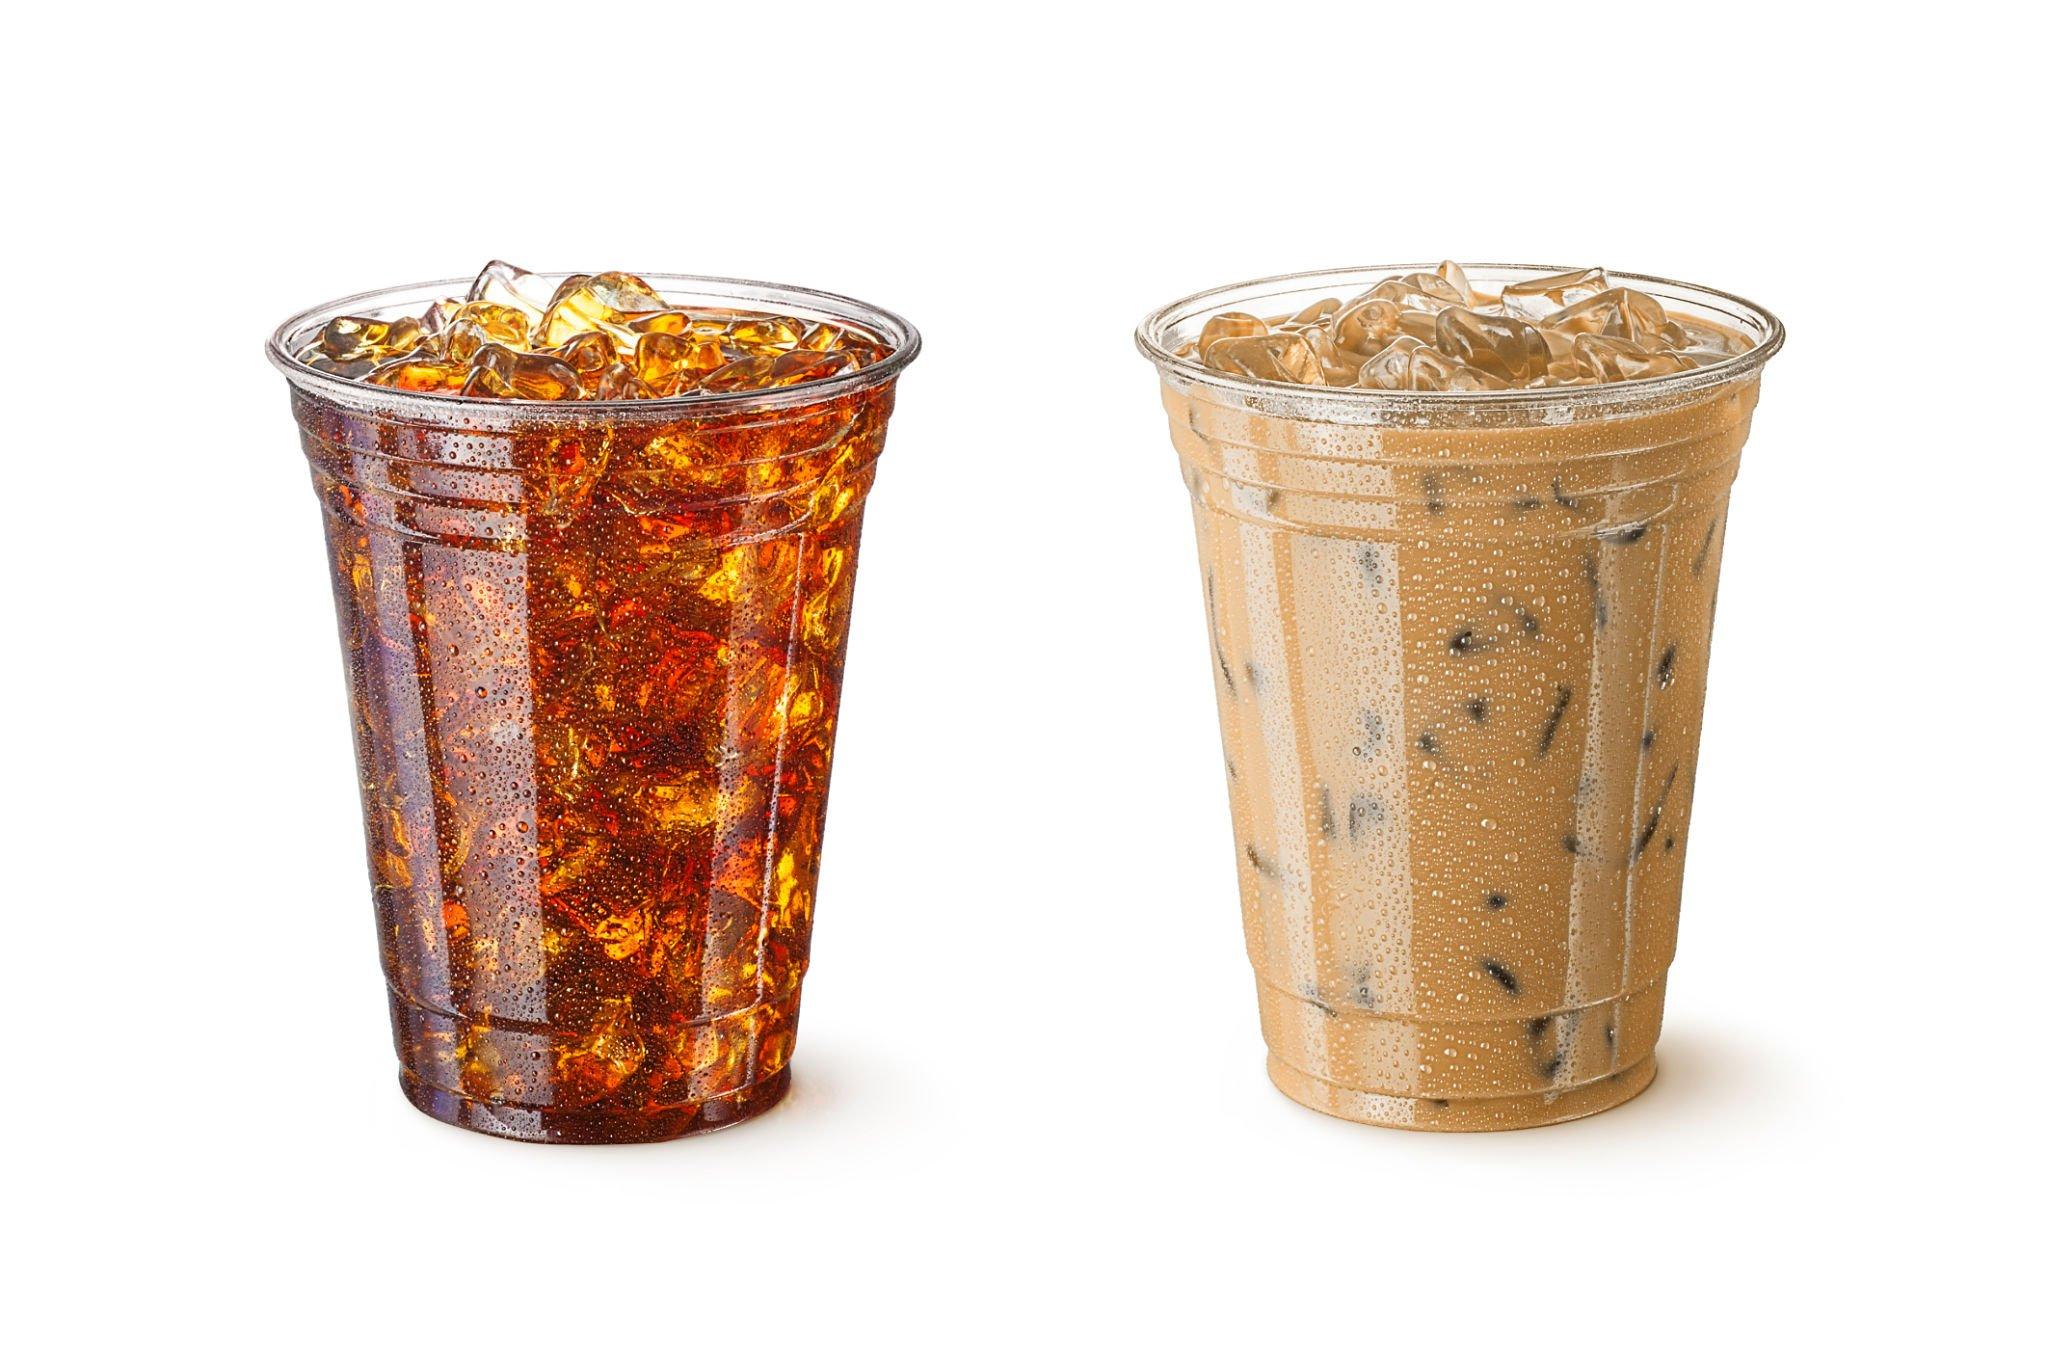 Which is better for you: Iced Latte or Iced Coffee?